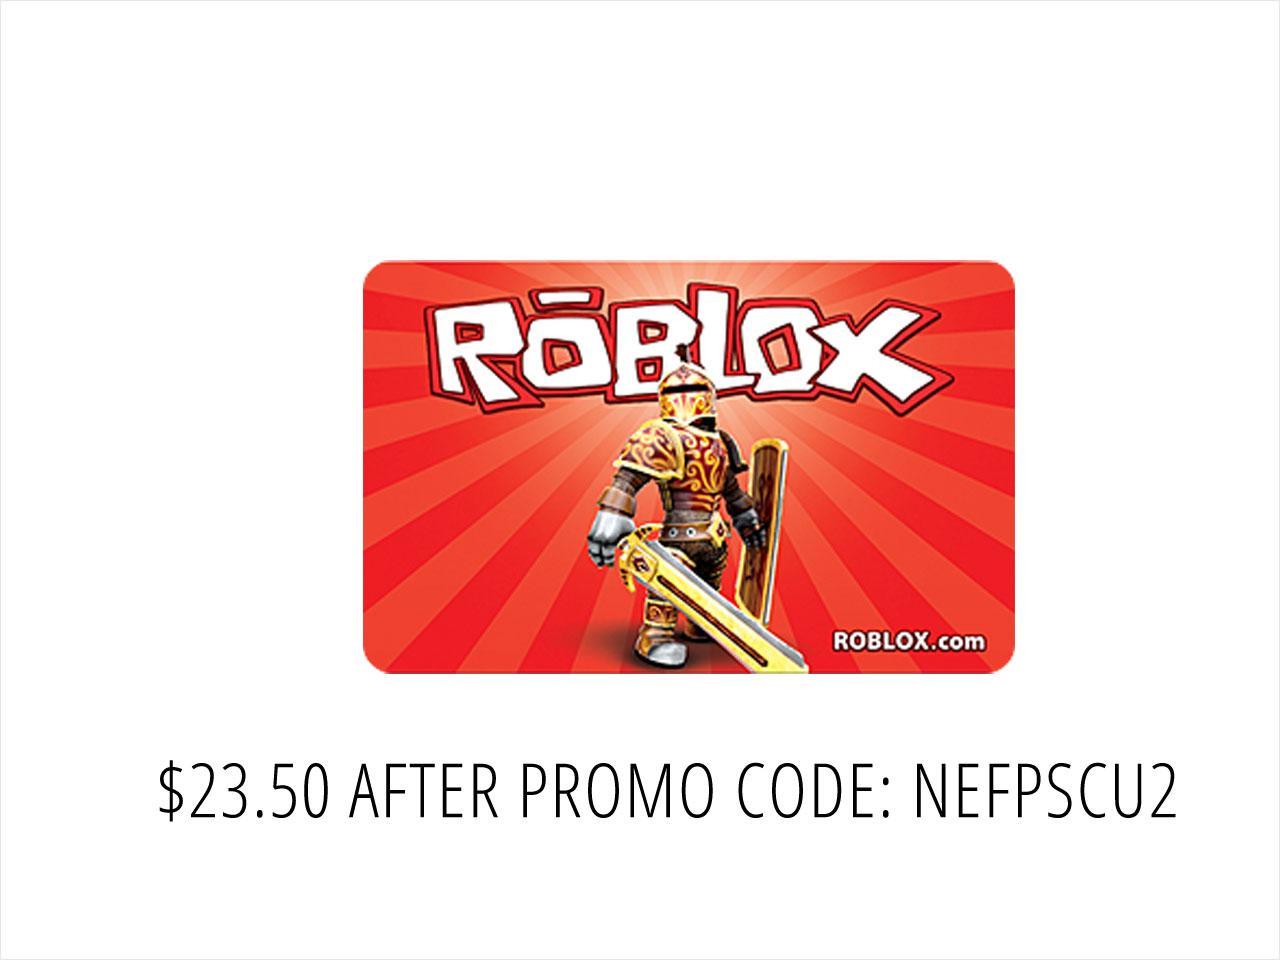 Roblox Gift Card Lowes